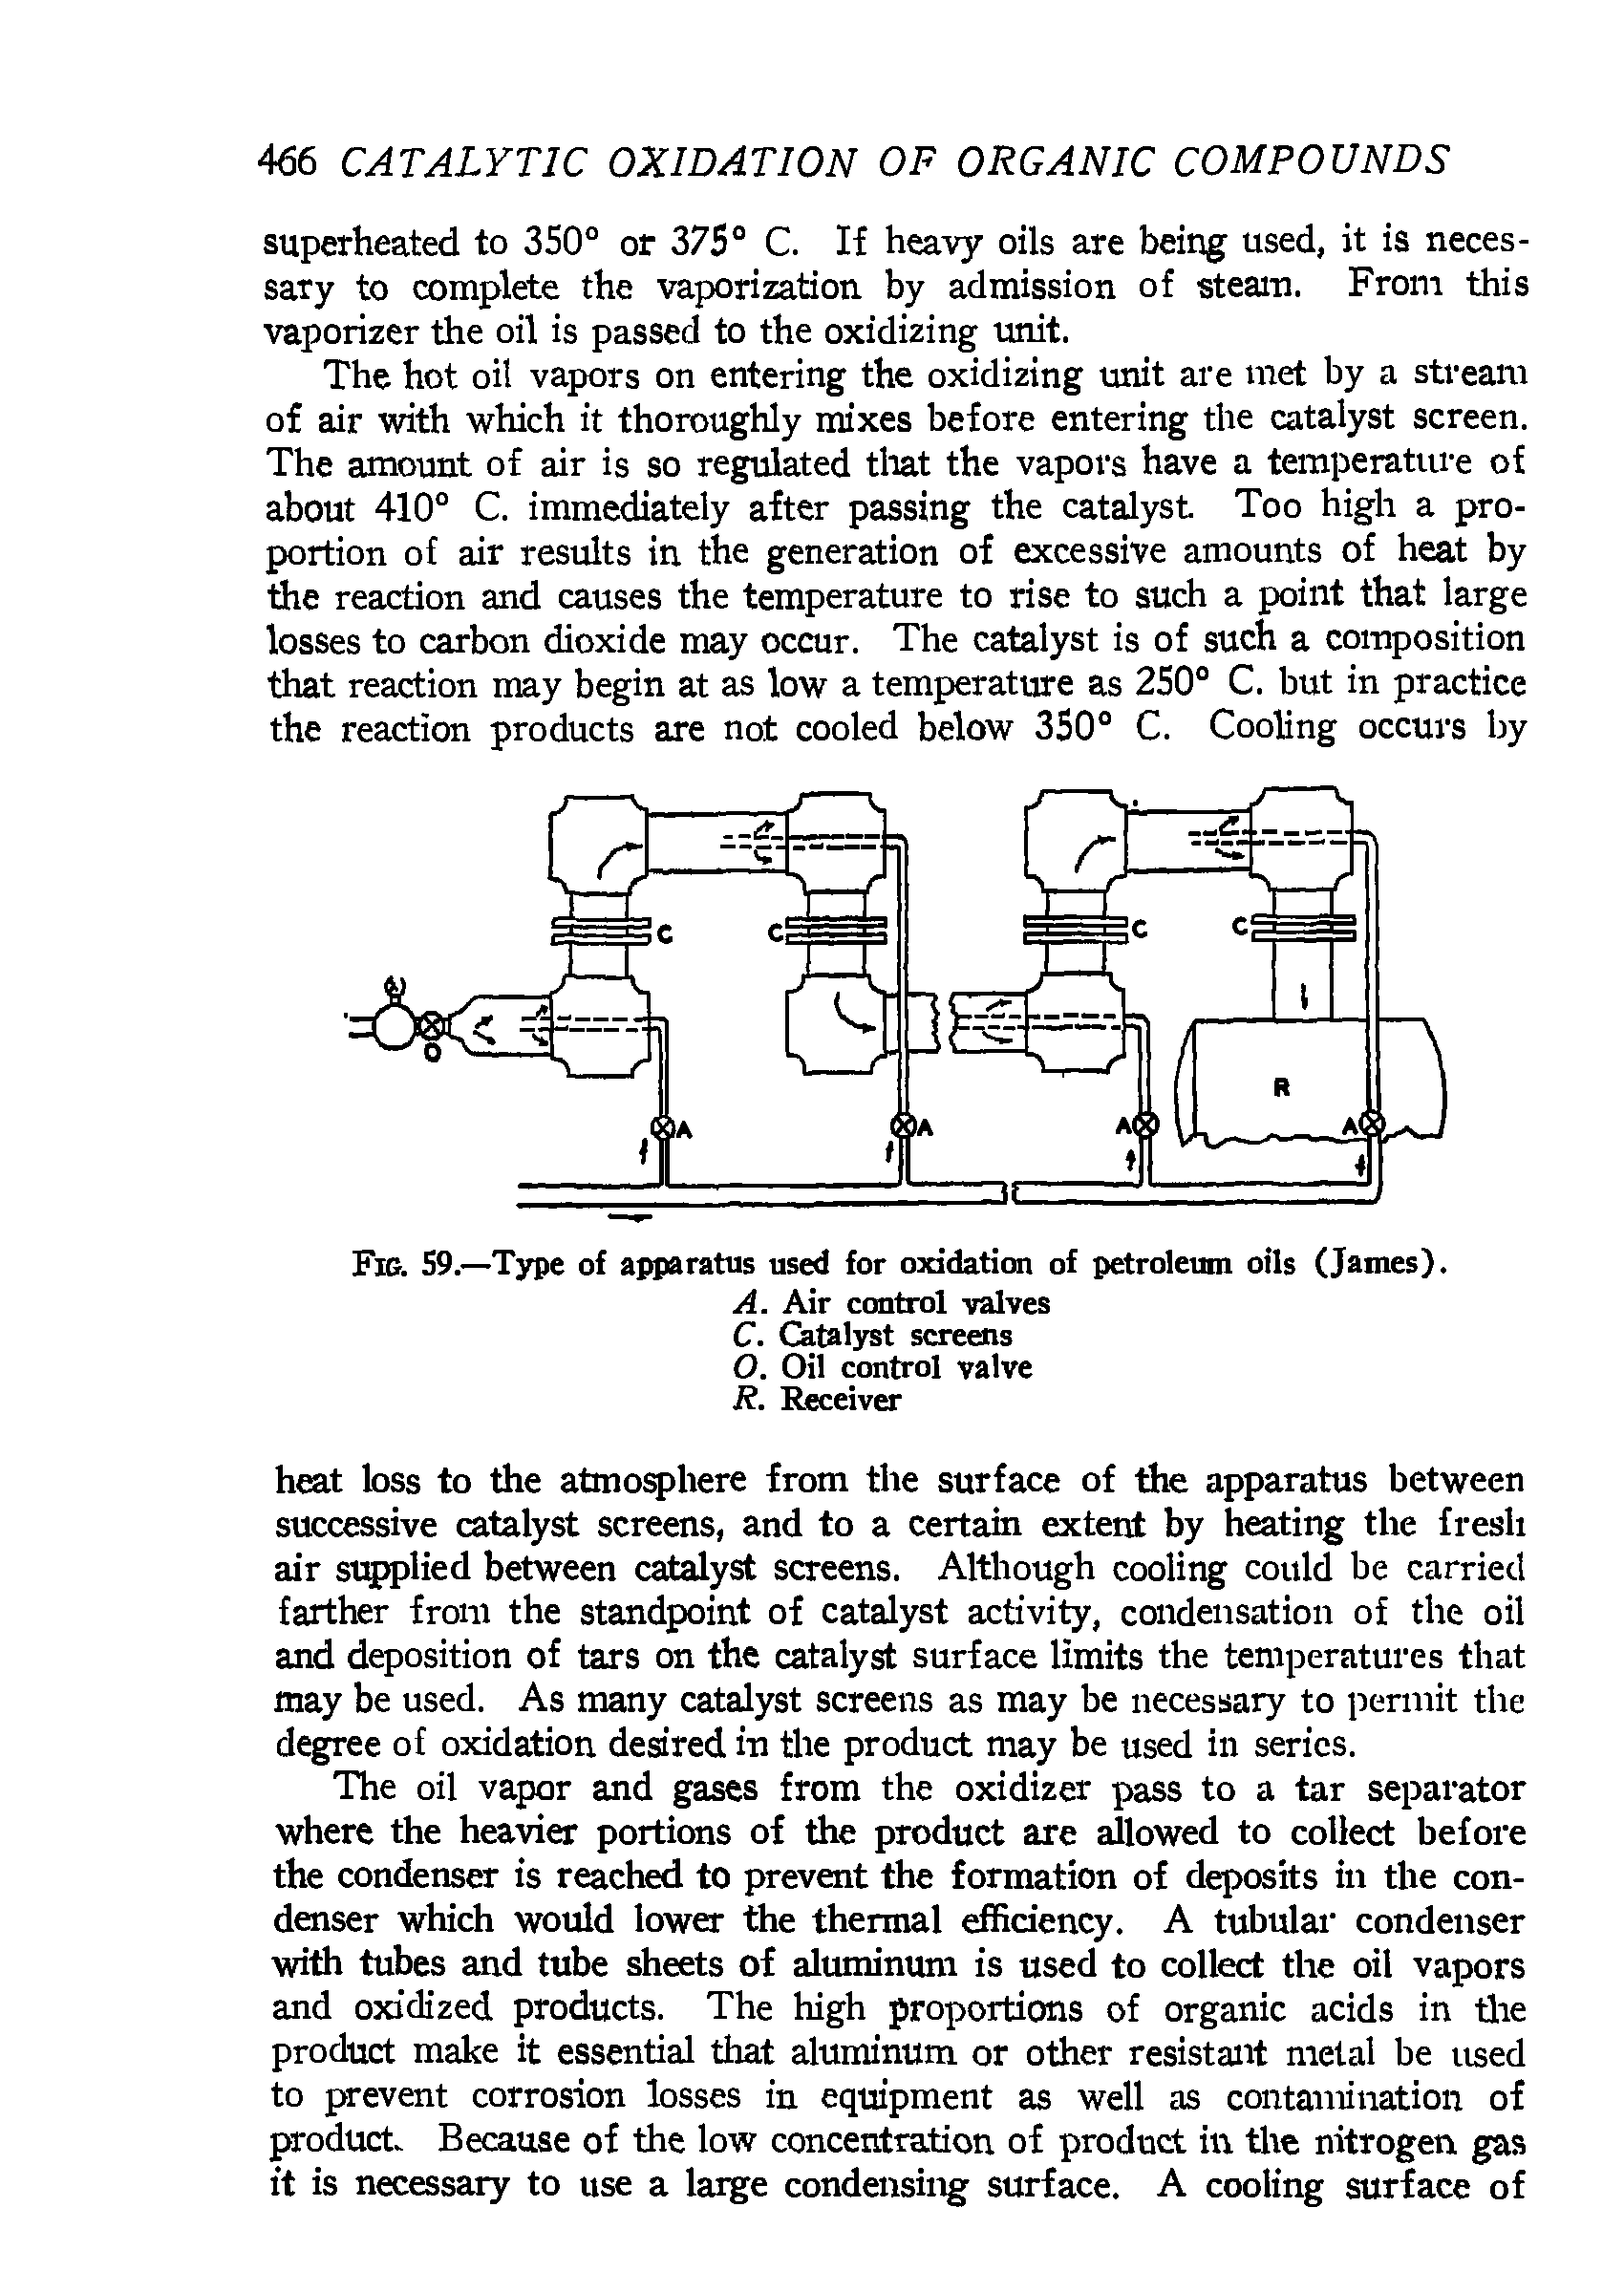 Fig. 59.—Type of apparatus used for oxidation of petroleum oils (James).